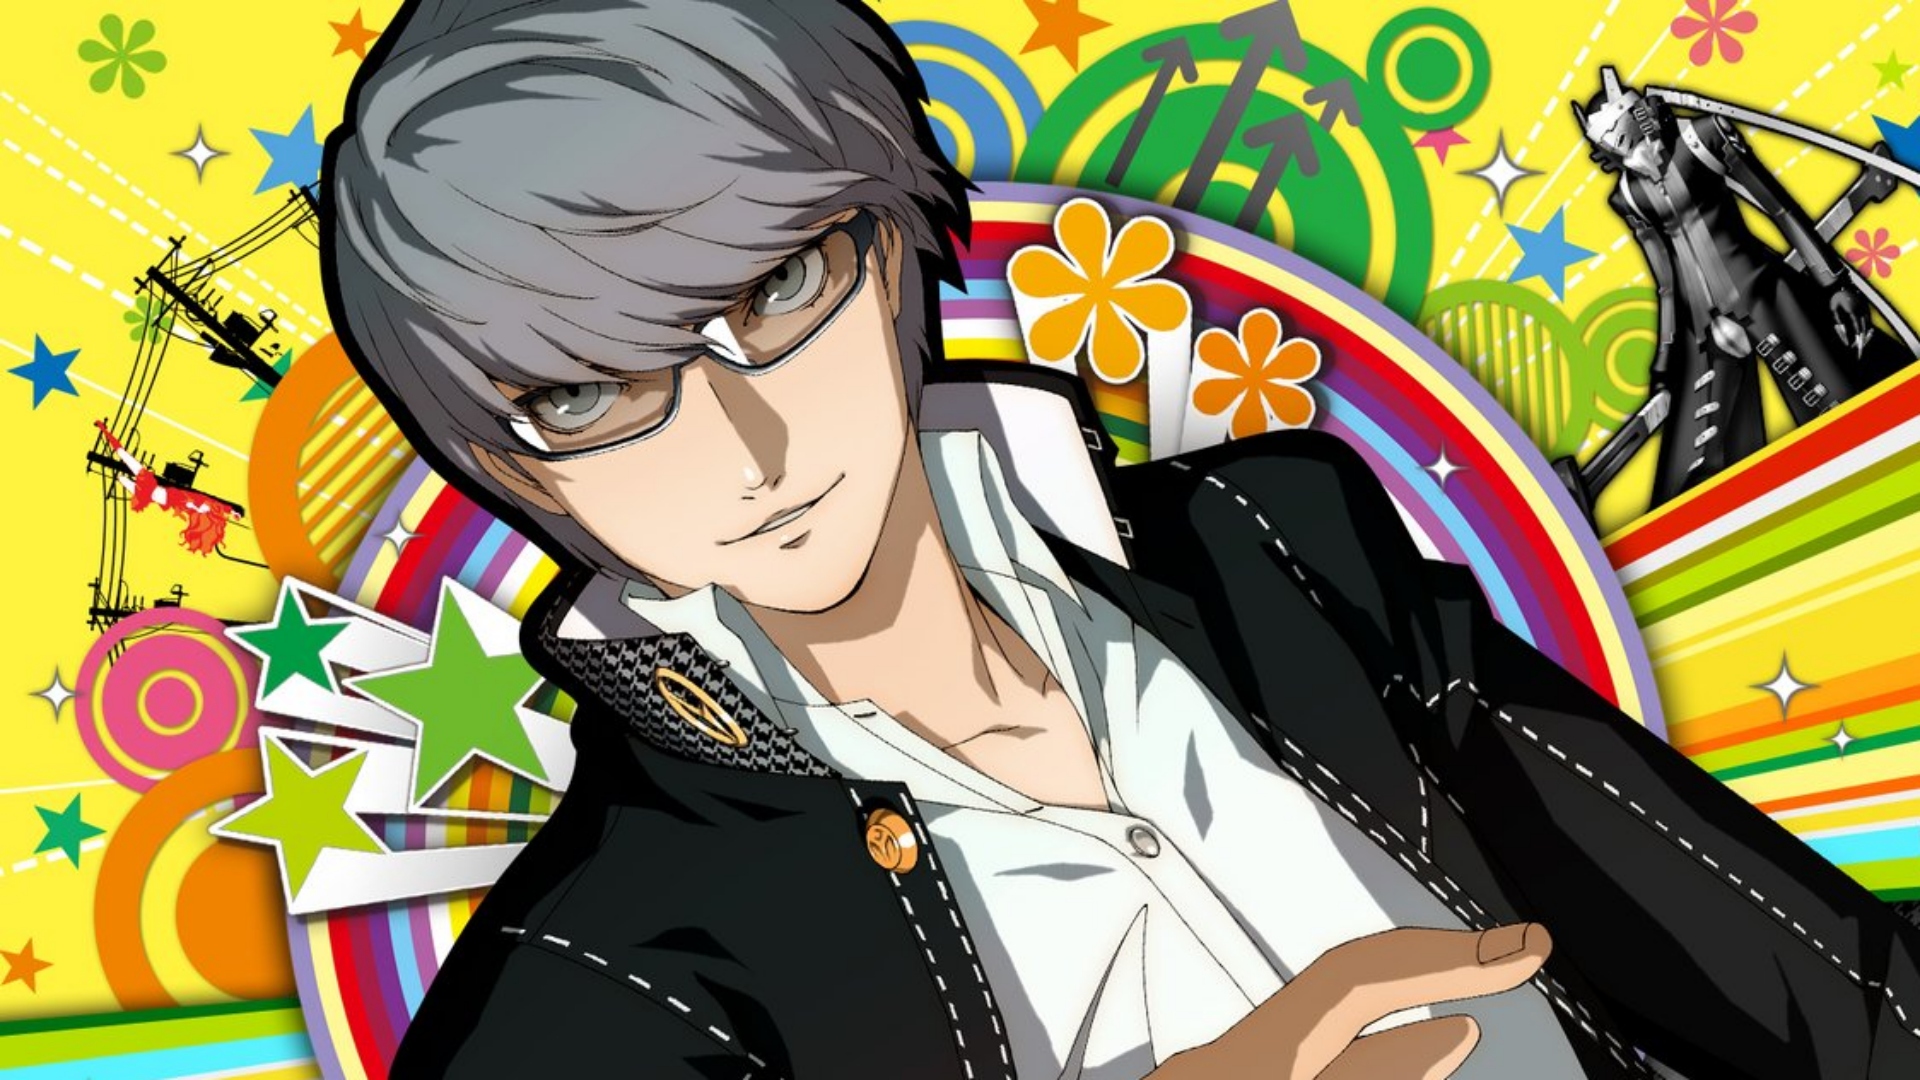 What Is The Canon Persona 4 Golden Protagonist Name?